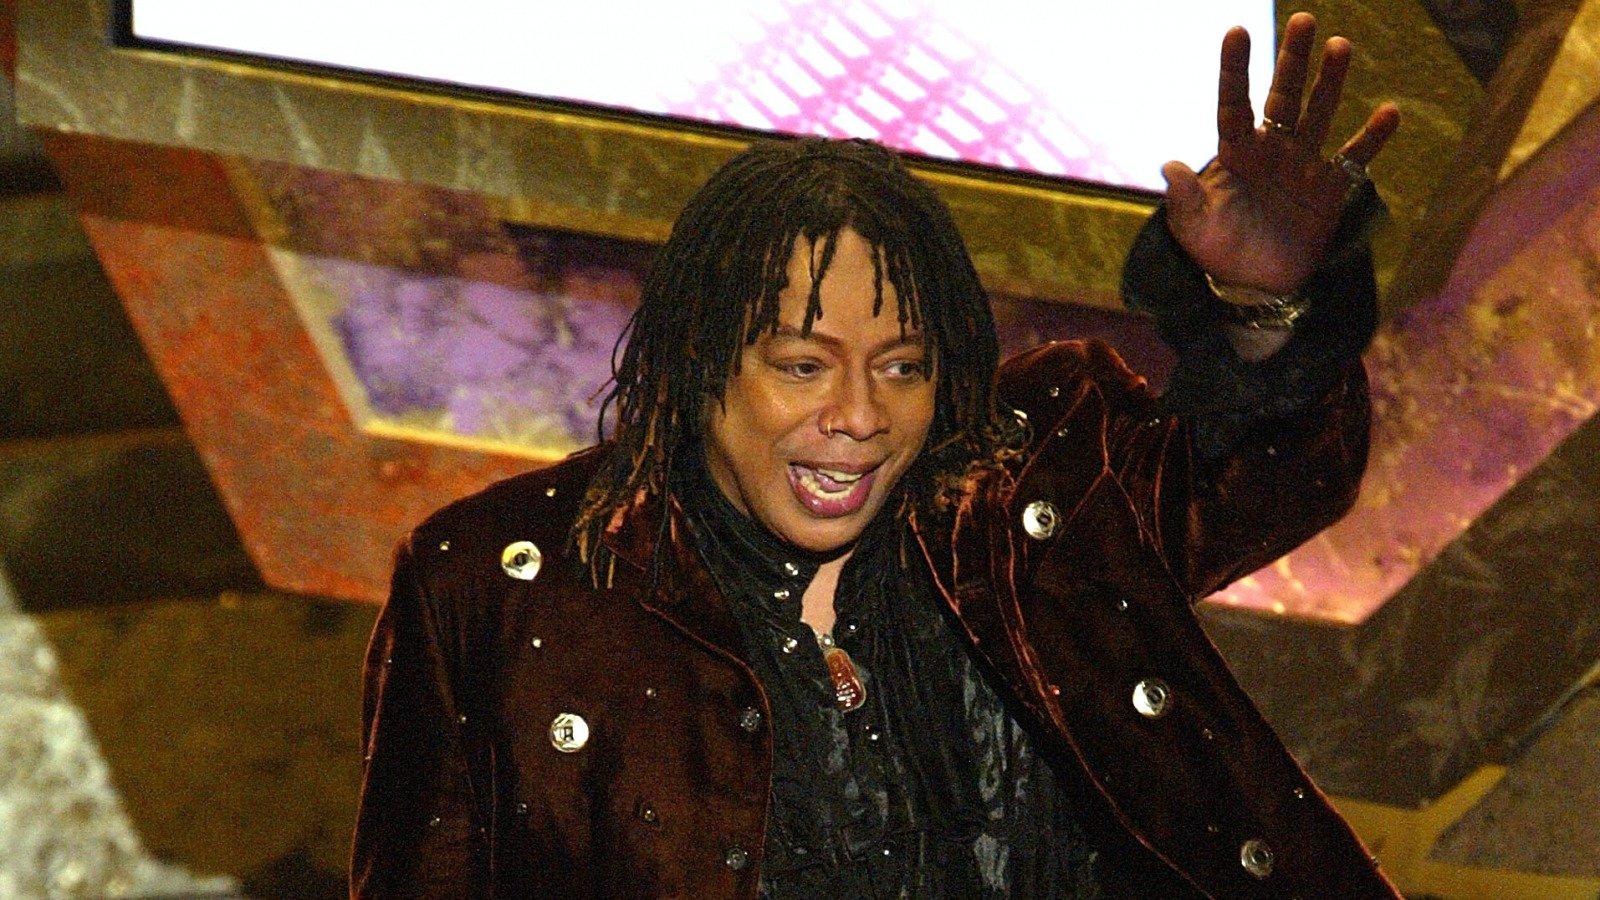 The Sketchy Reason You Wouldn't Want To Meet Rick James In Real Life